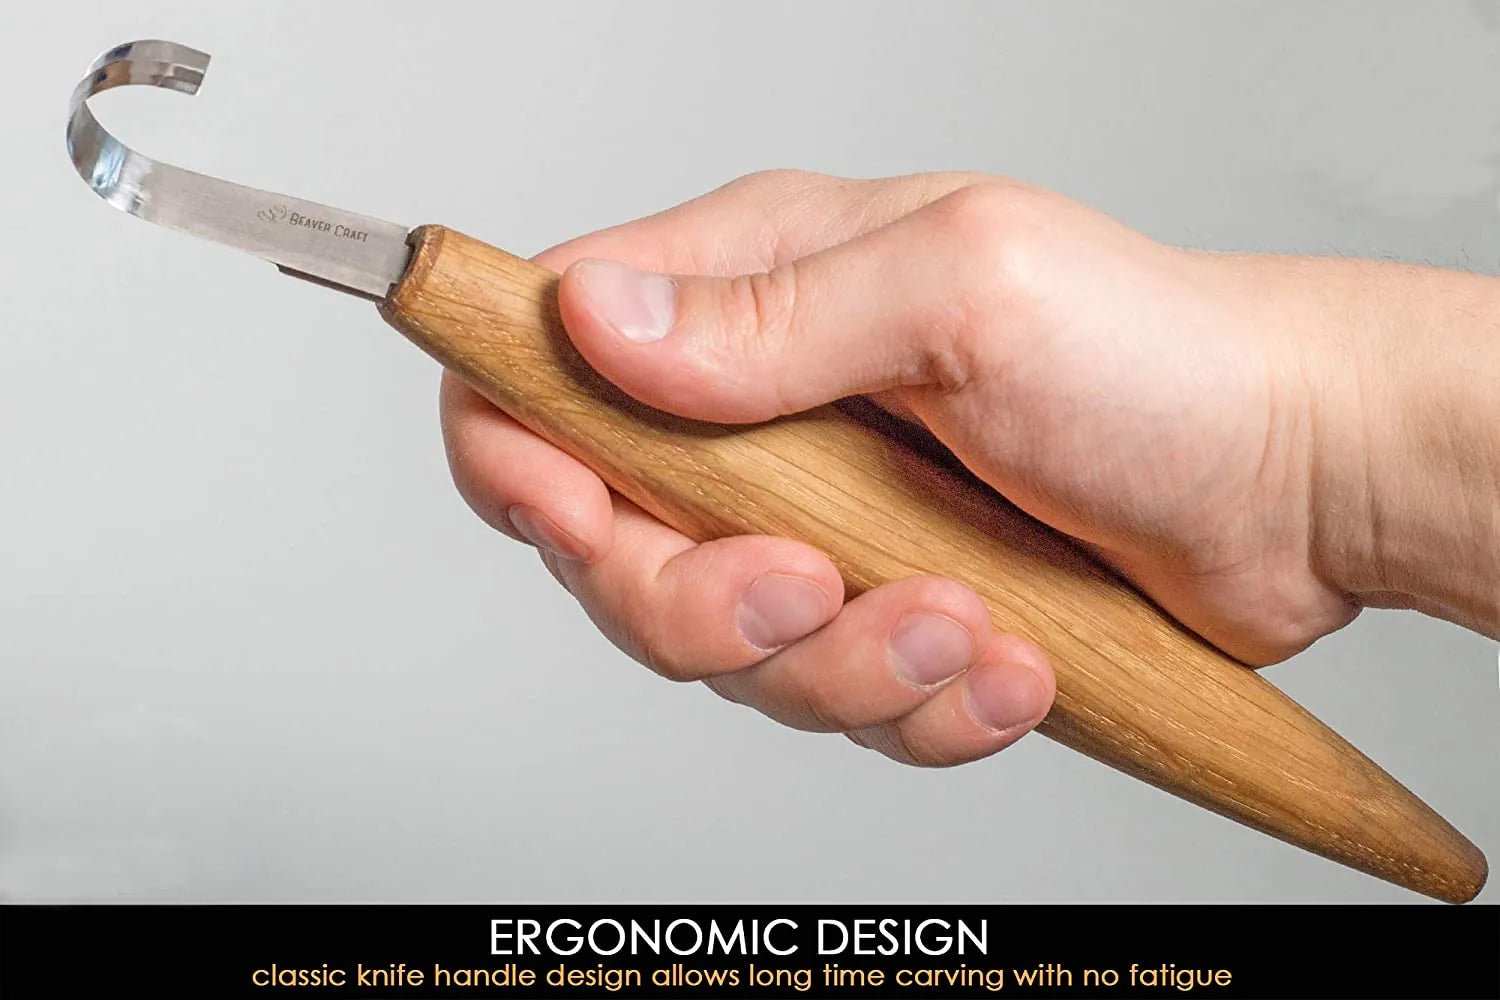 Spoon Carving Hook Knife with octagonal handle - The Spoon Crank